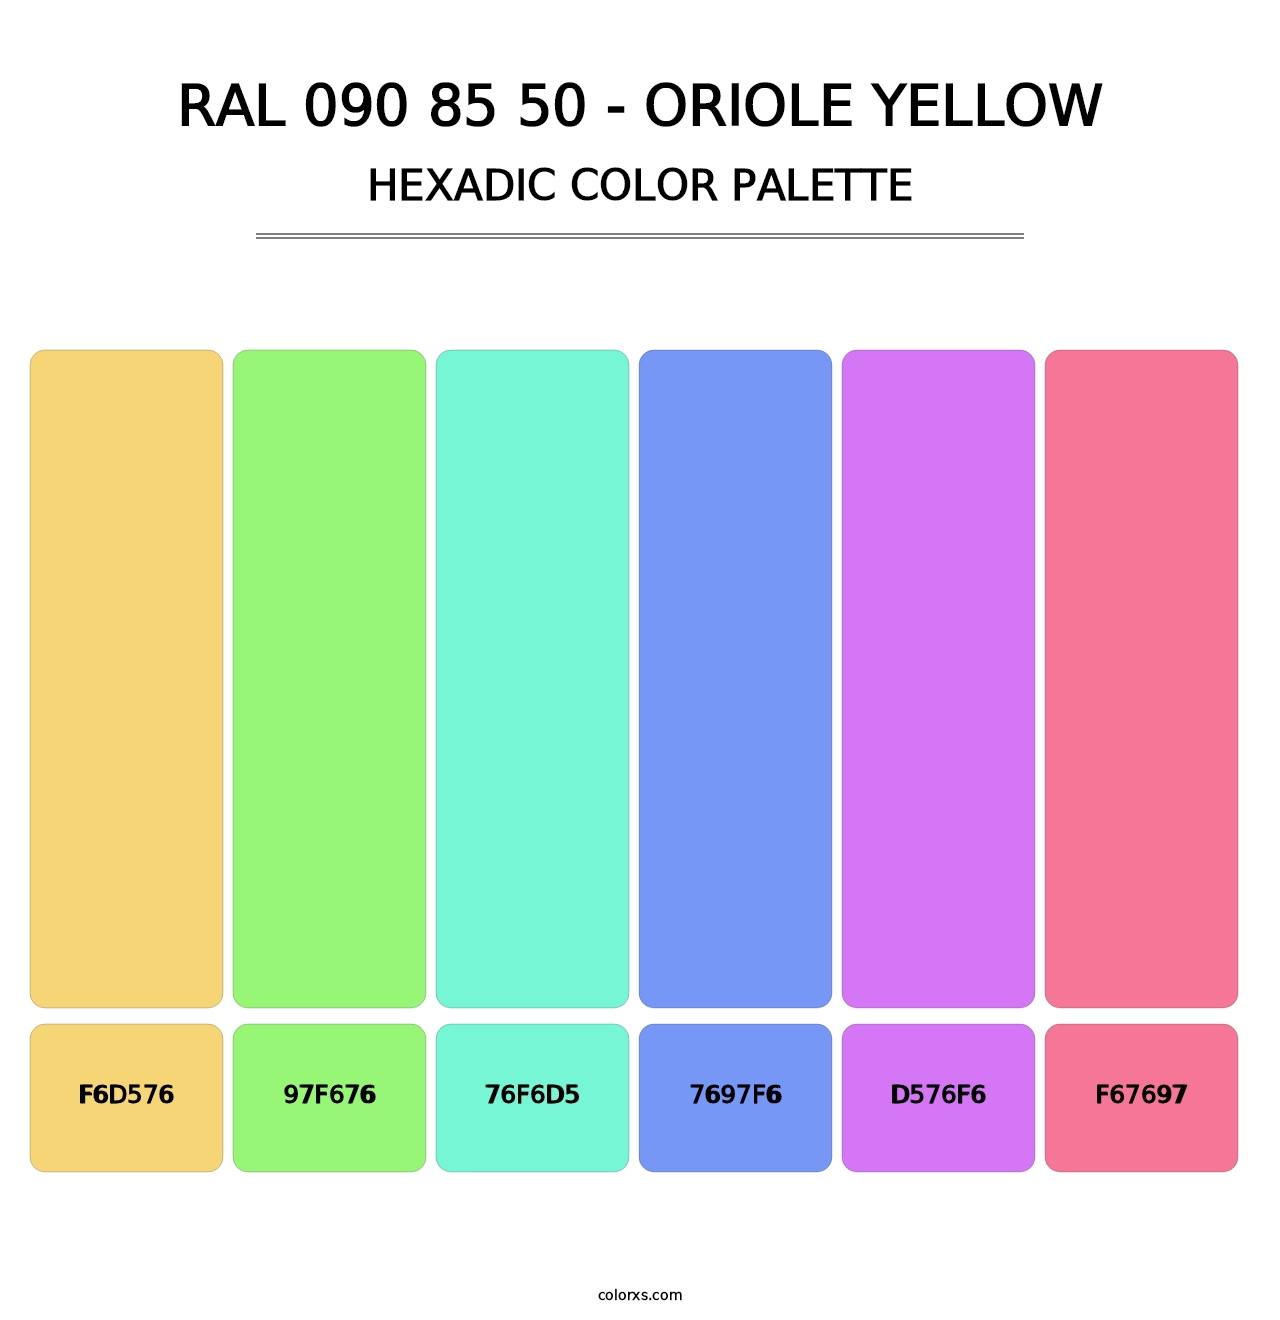 RAL 090 85 50 - Oriole Yellow - Hexadic Color Palette